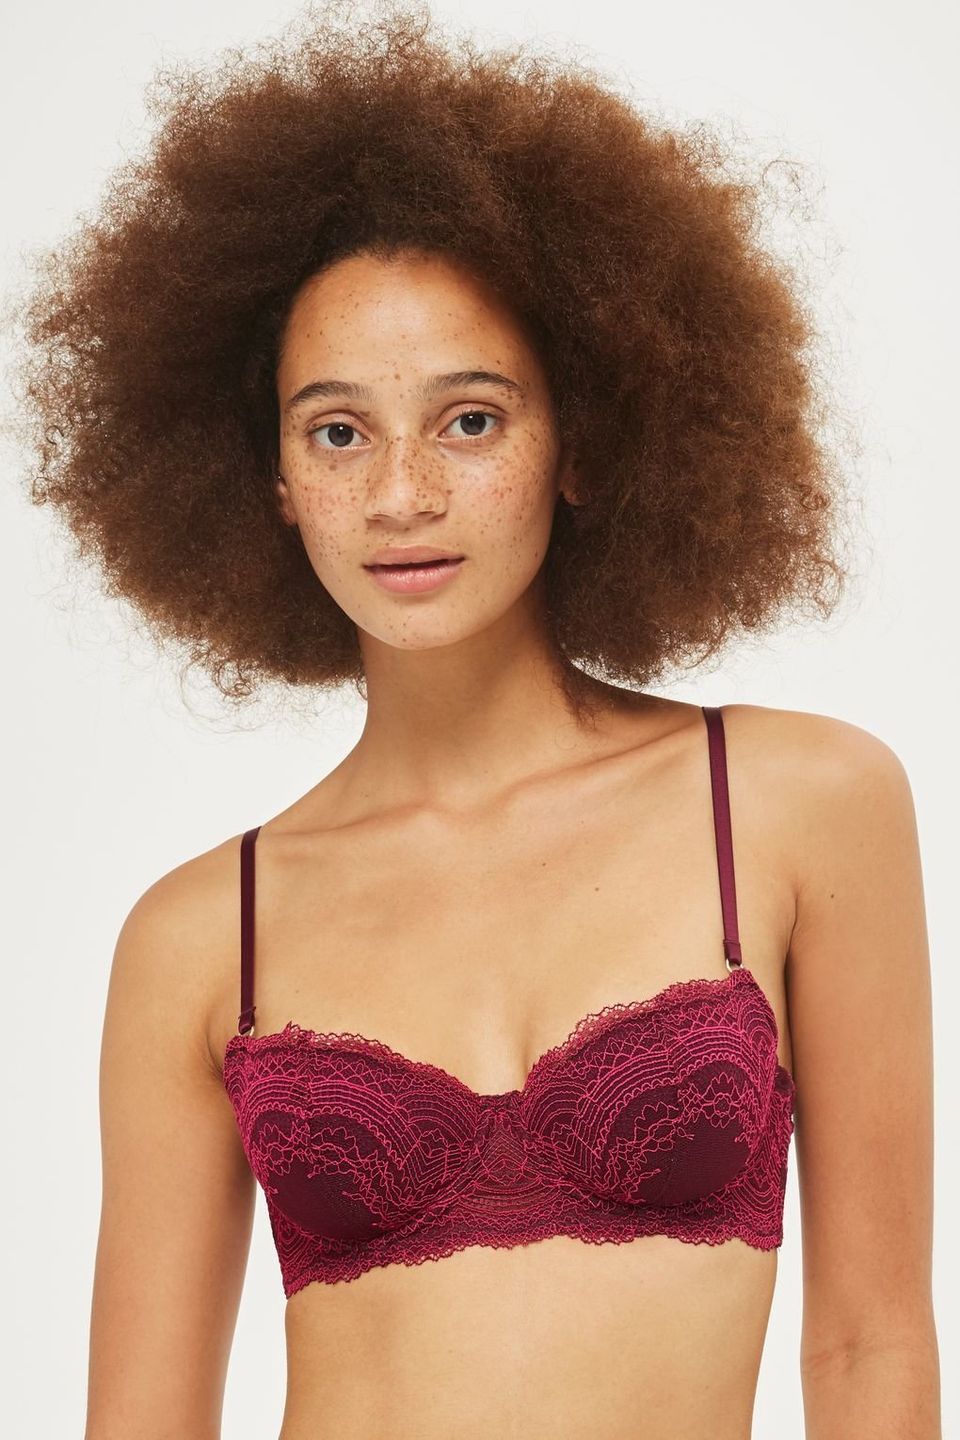 H&M Launches Bra Collection For Breast Cancer Awareness